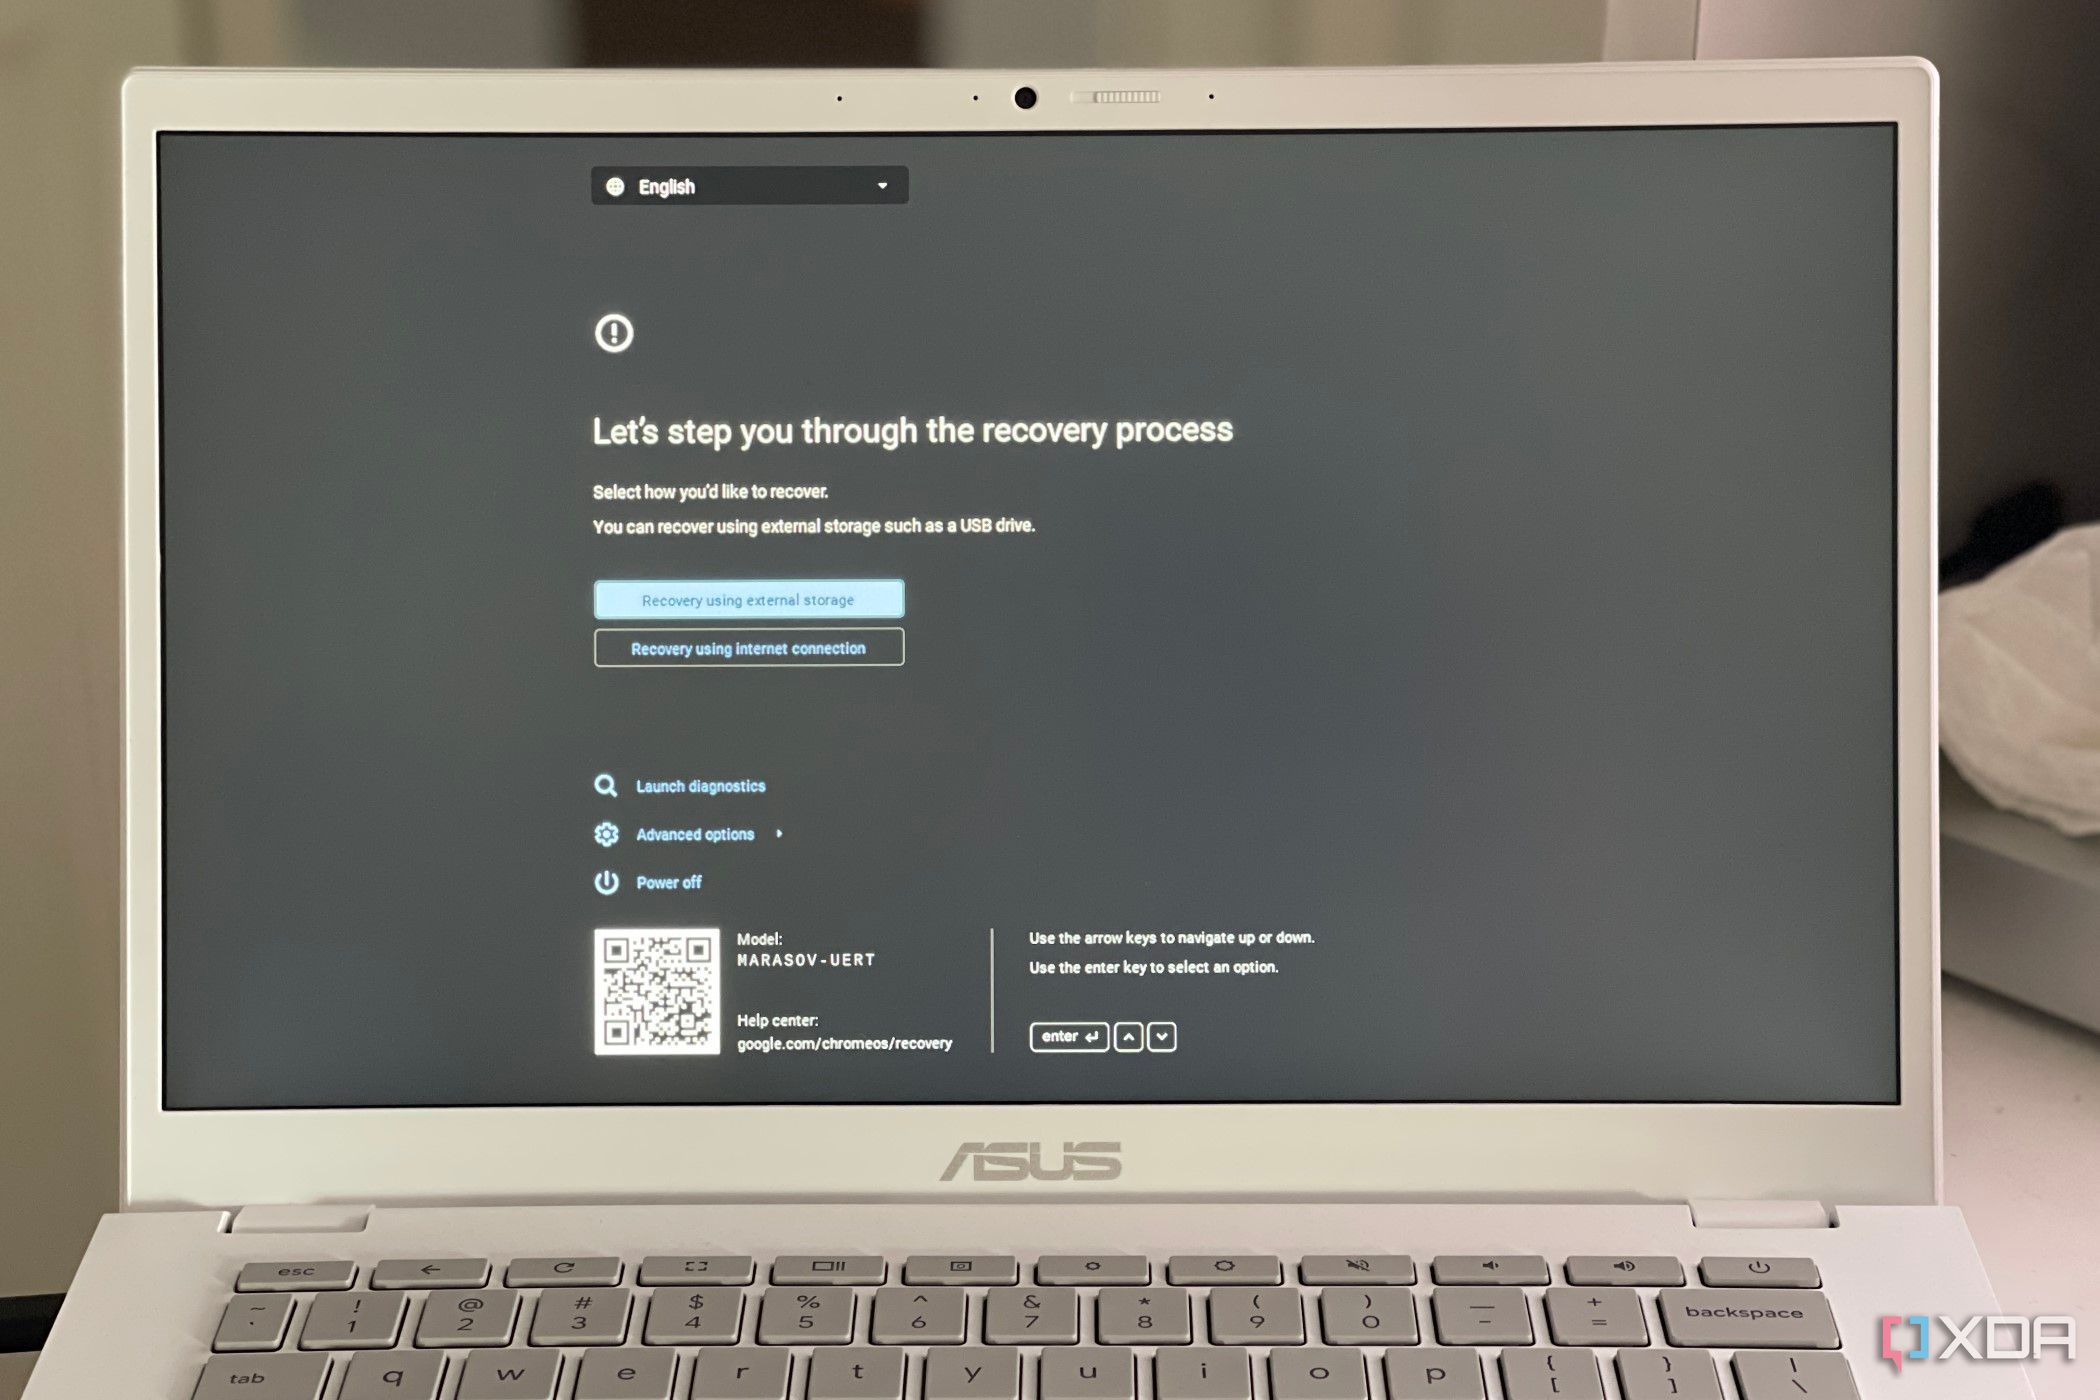 A photo showing the ChromeOS Chromebook Recovery screen